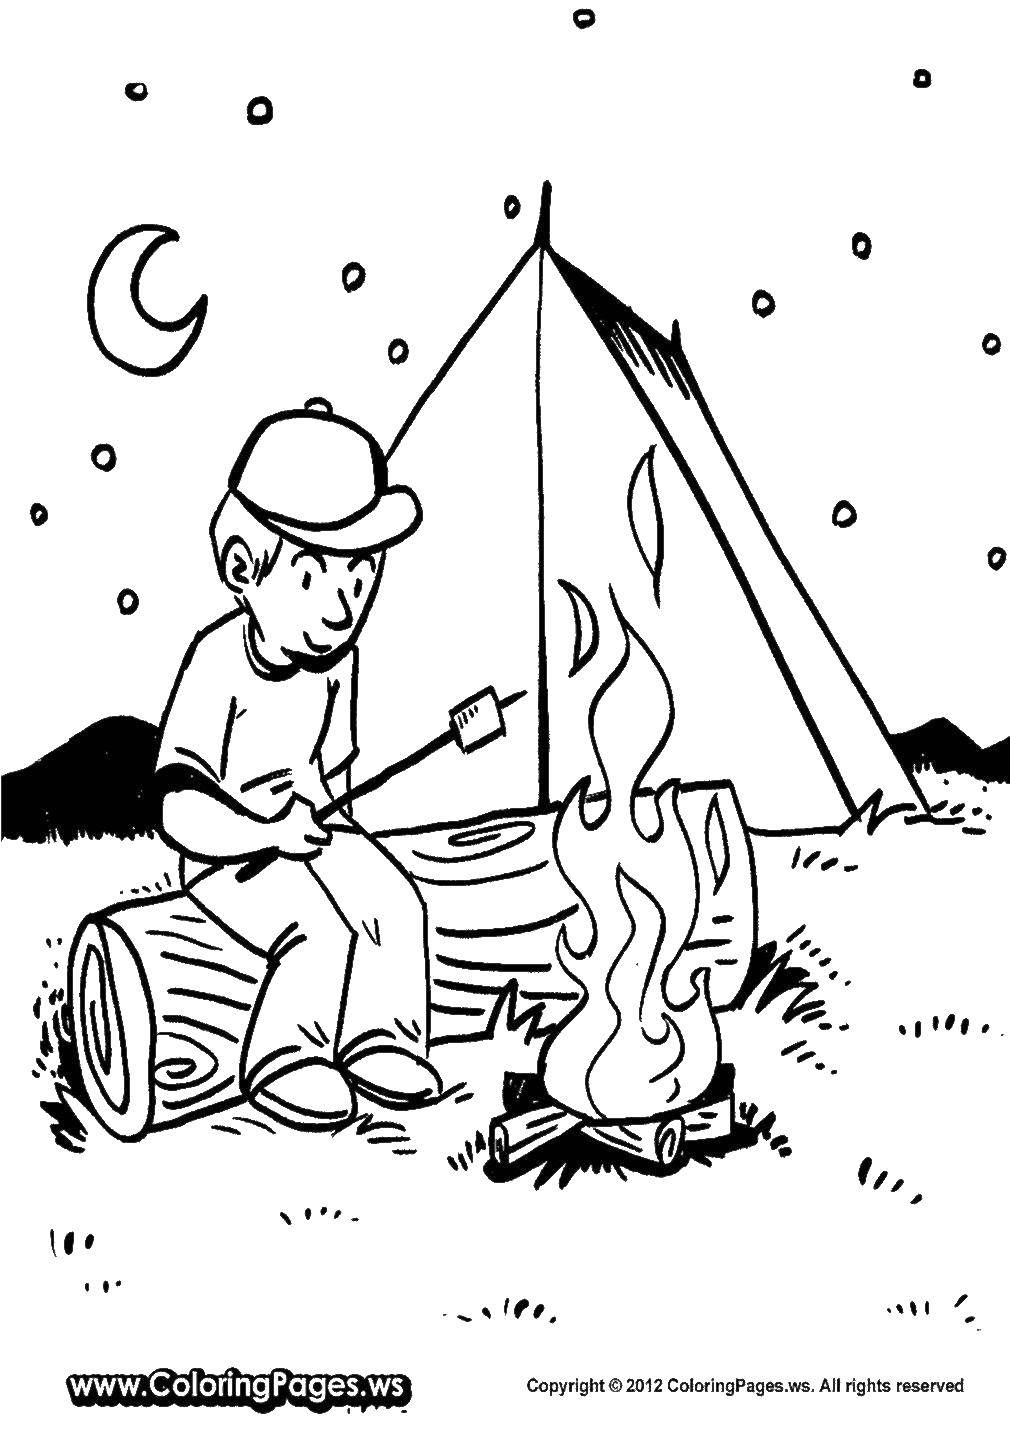 Coloring Guy roasts marshmallows. Category Camping. Tags:  tent, boy, fire.